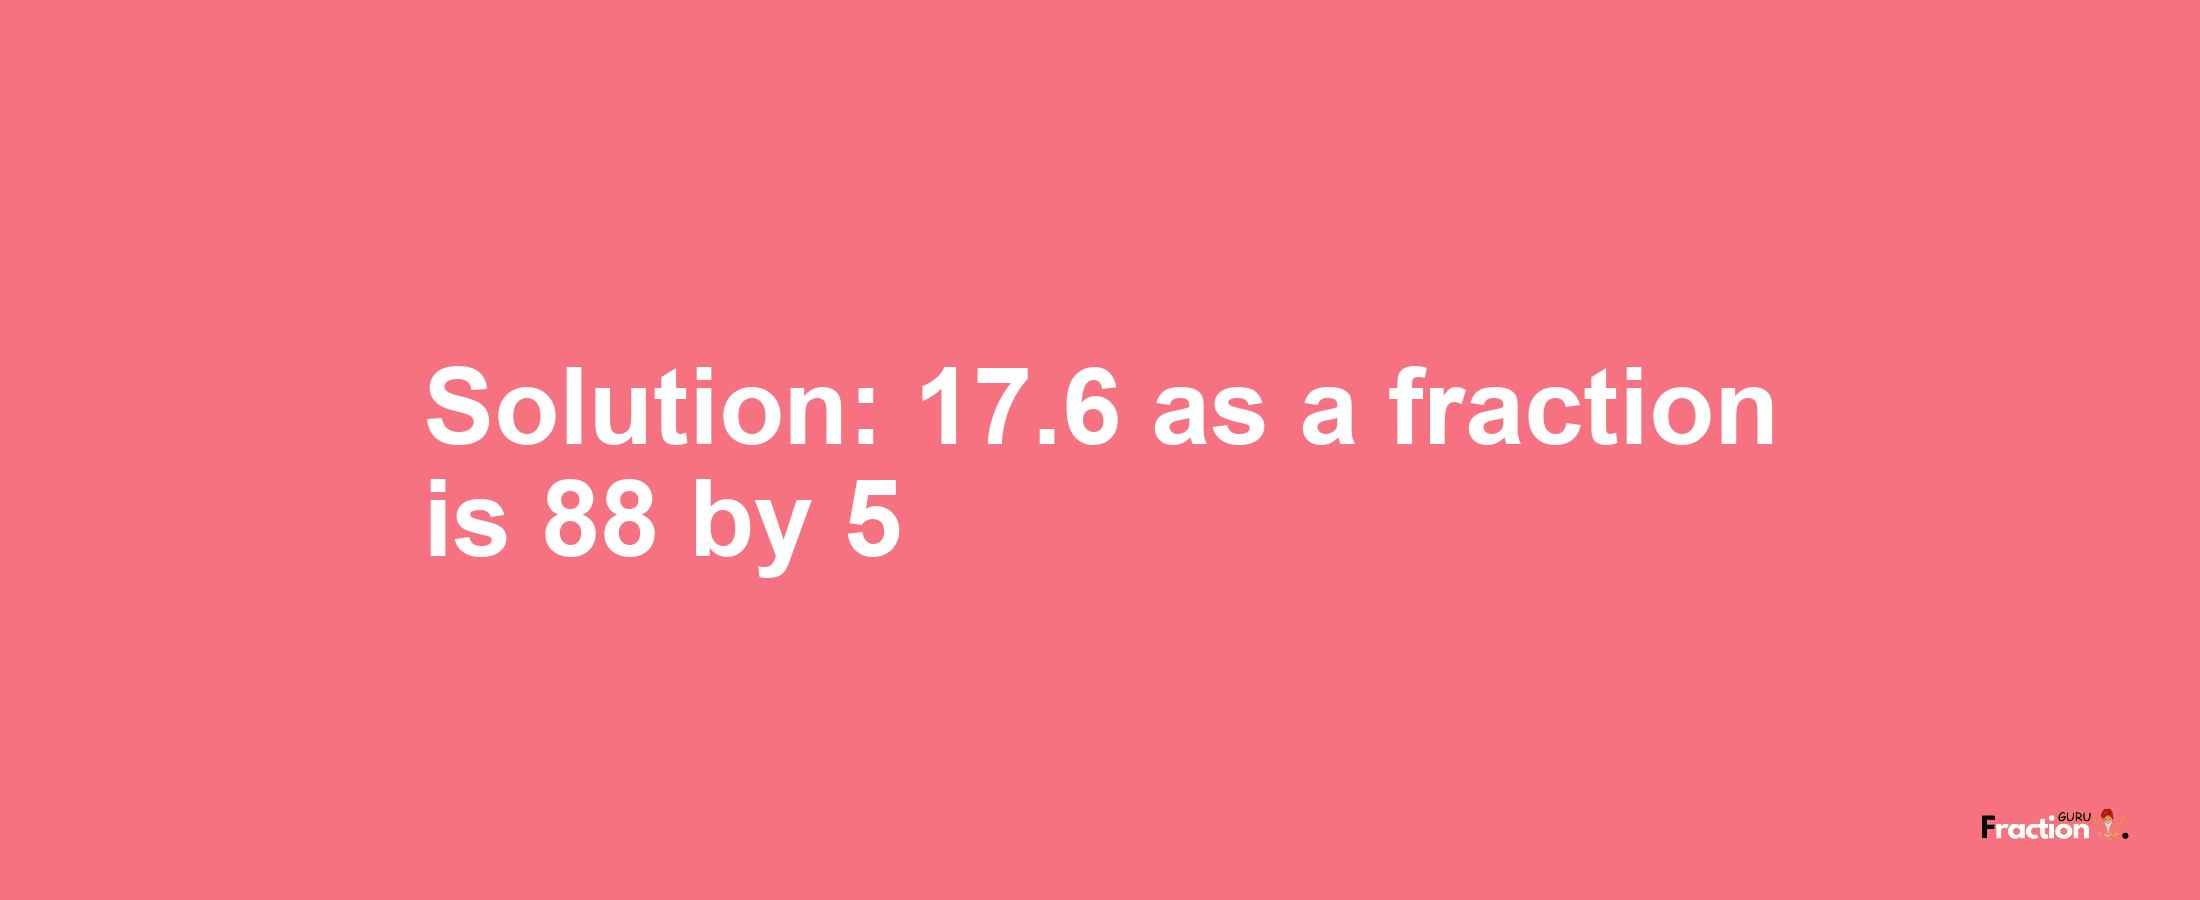 Solution:17.6 as a fraction is 88/5